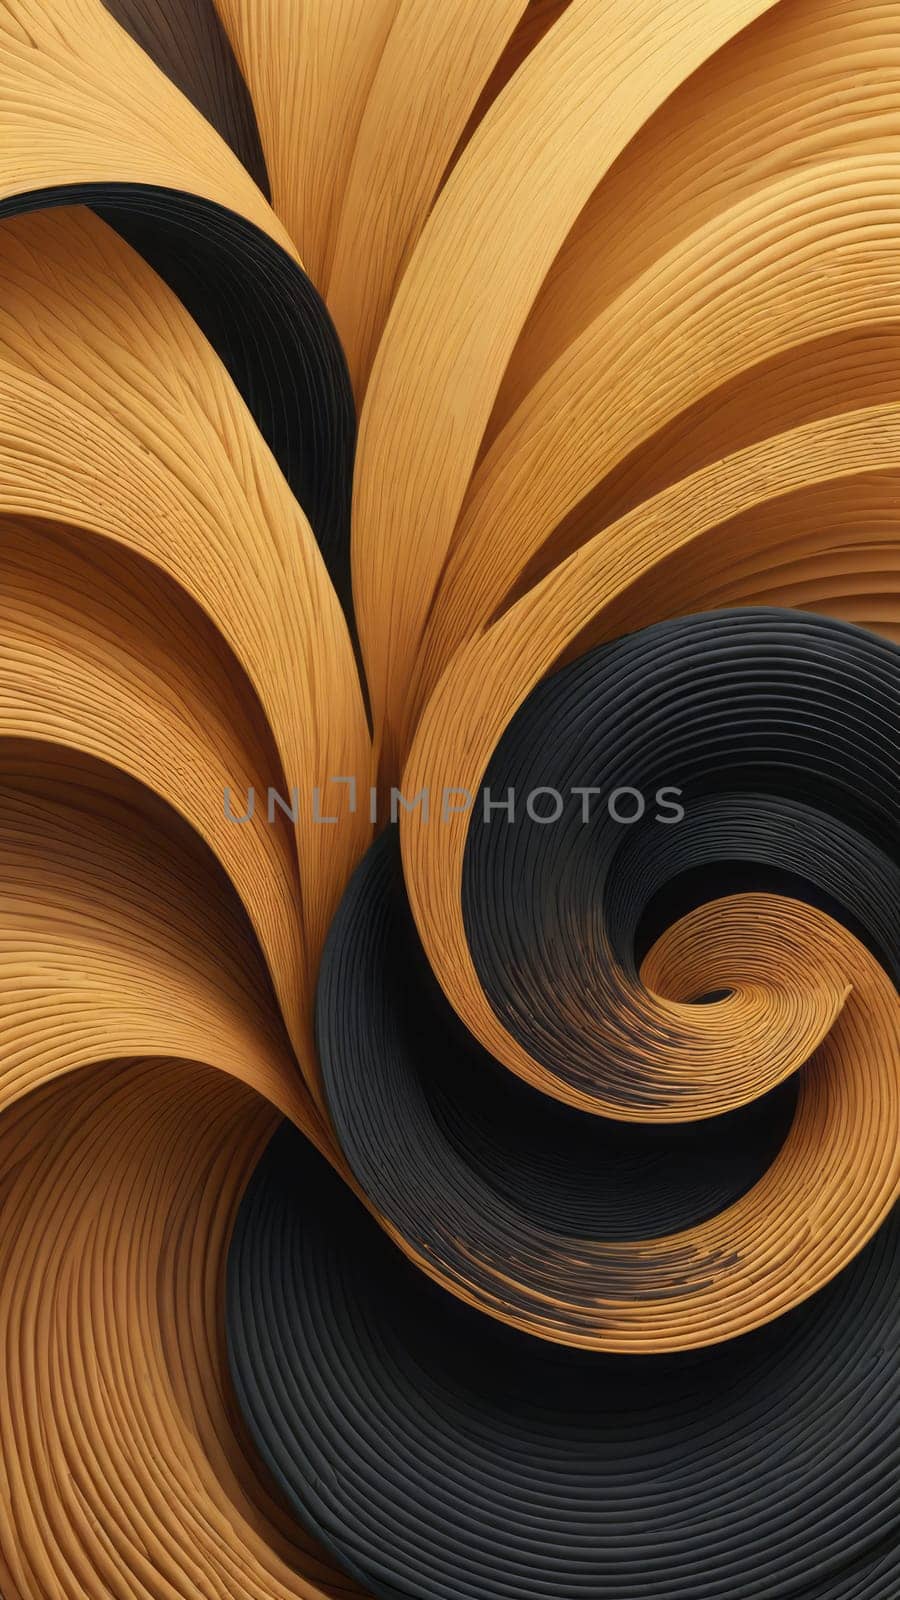 Screen background from Coiled shapes and black by nkotlyar